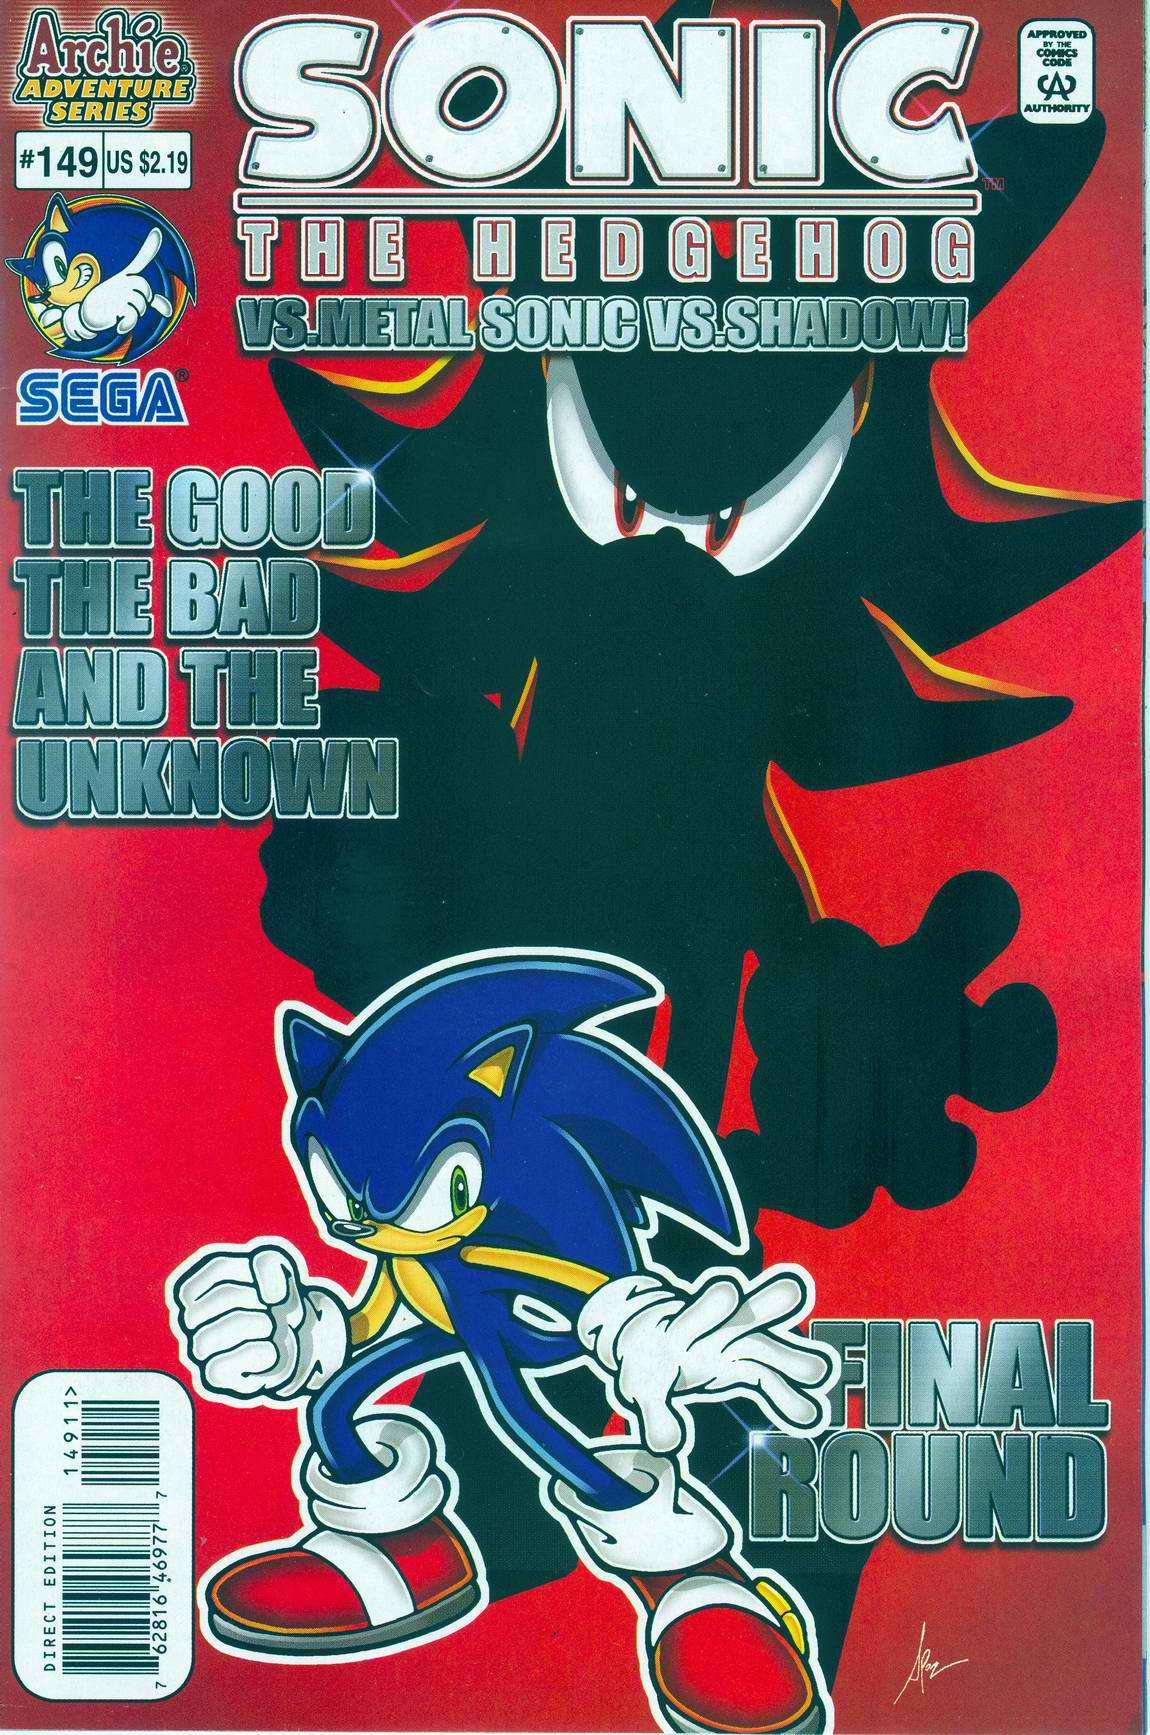 Sonic - Archie Adventure Series July 2005 Cover Page